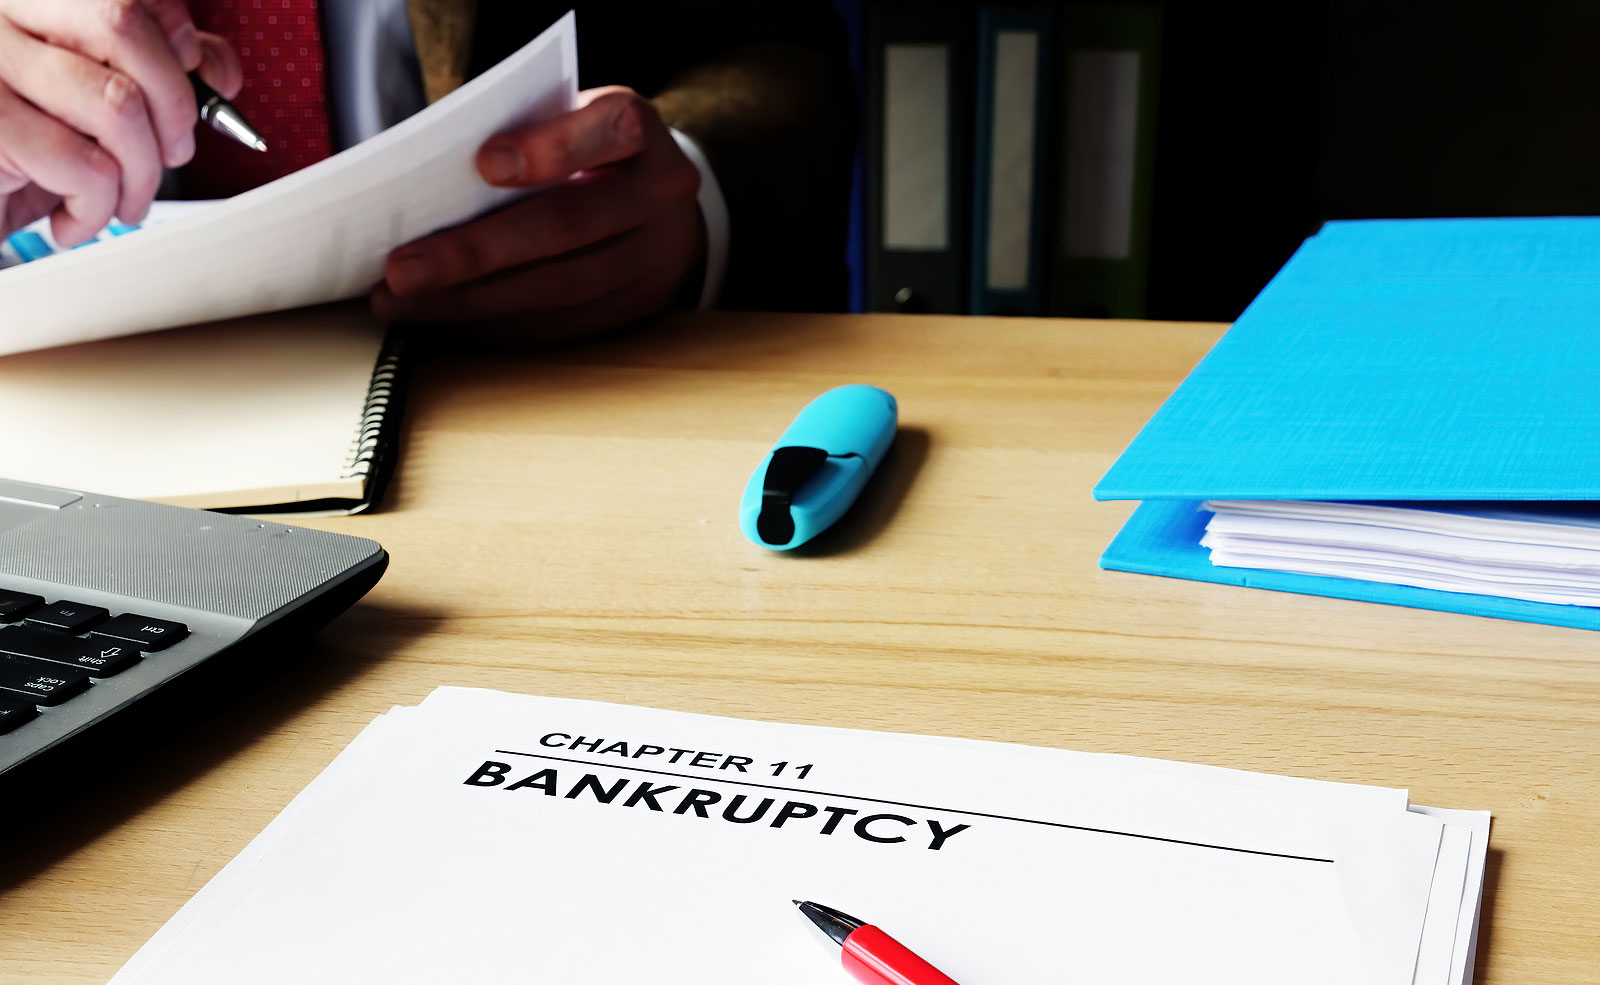 March Total Bankruptcy Filings Increase 39% from Previous Month